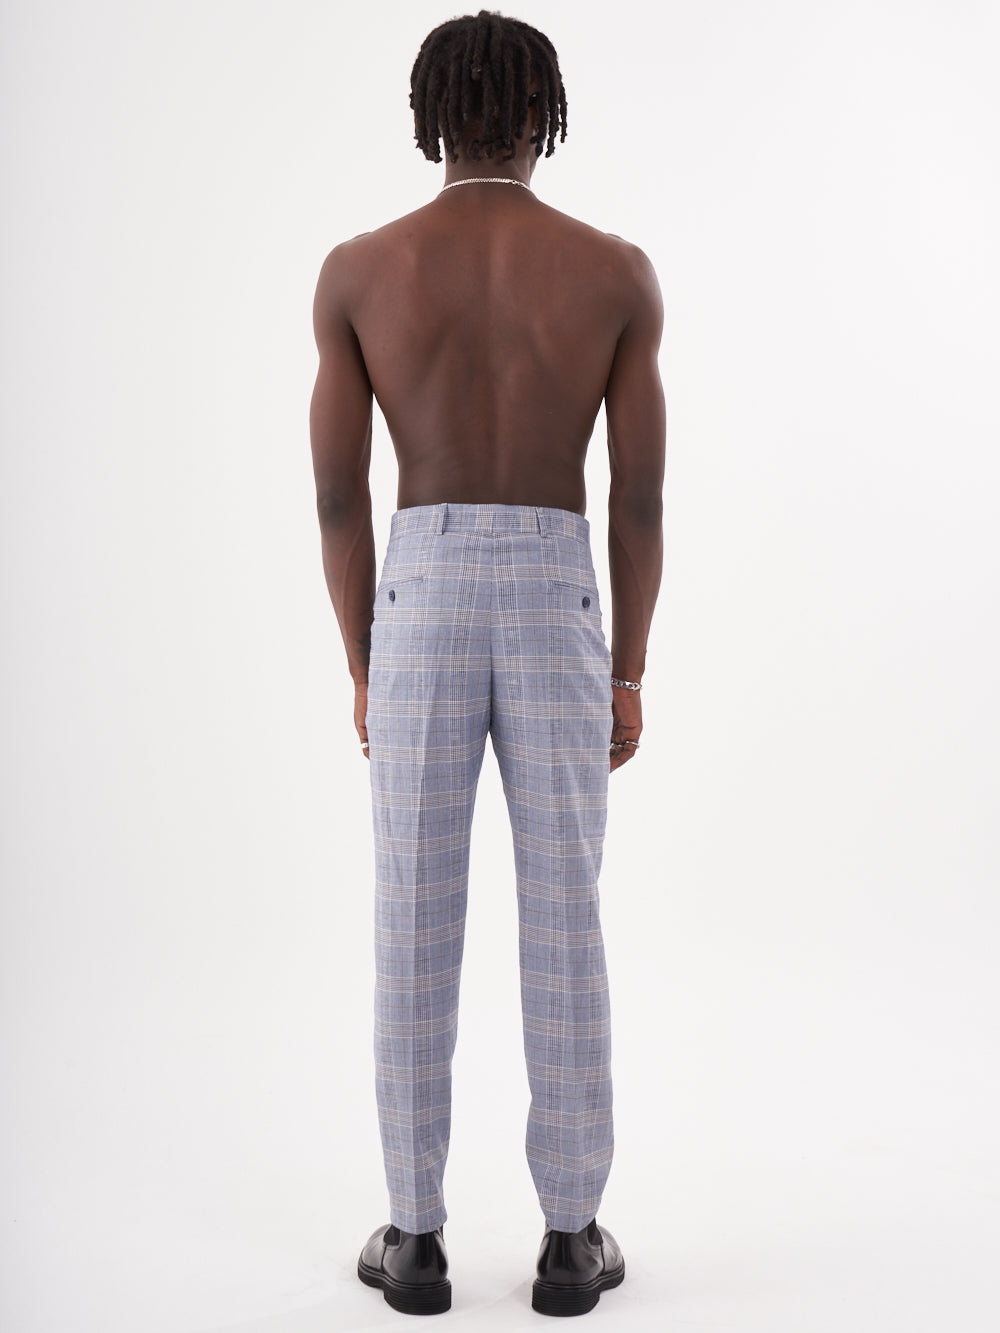 The back view of a man wearing MORAINE PANTS.